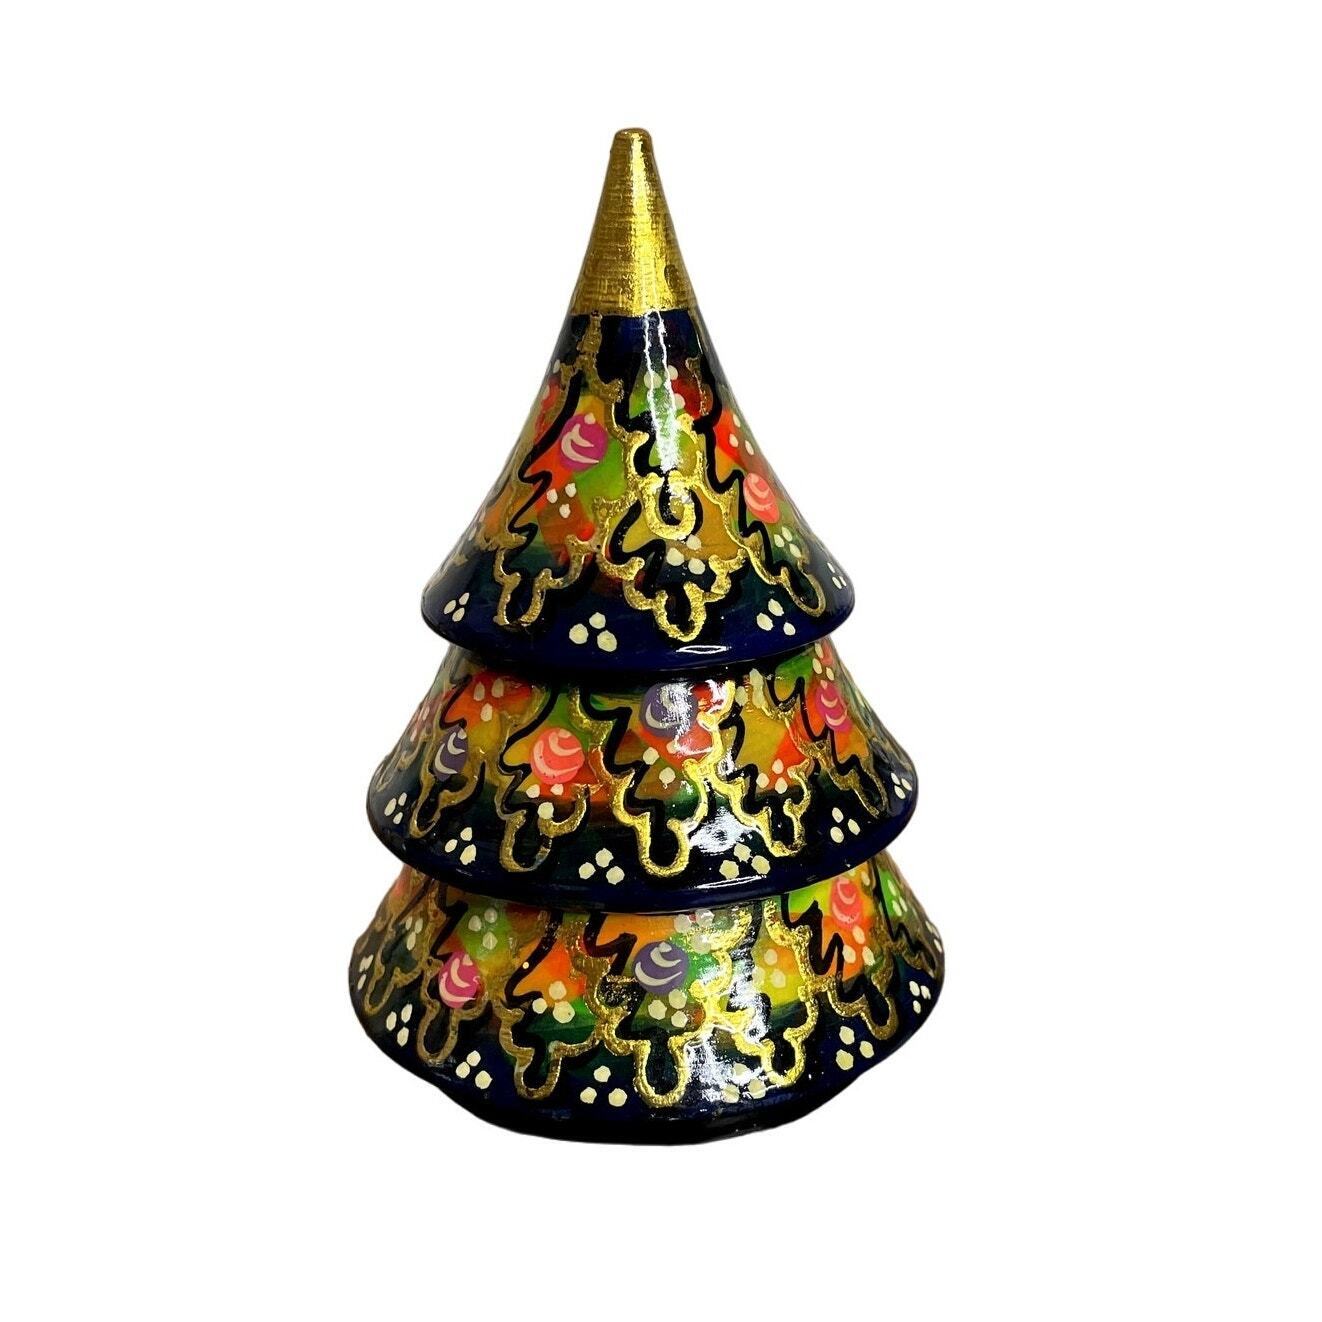 Russian Roly Poly Christmas Tree Hand Painted Lacquered Wood Musical Chime